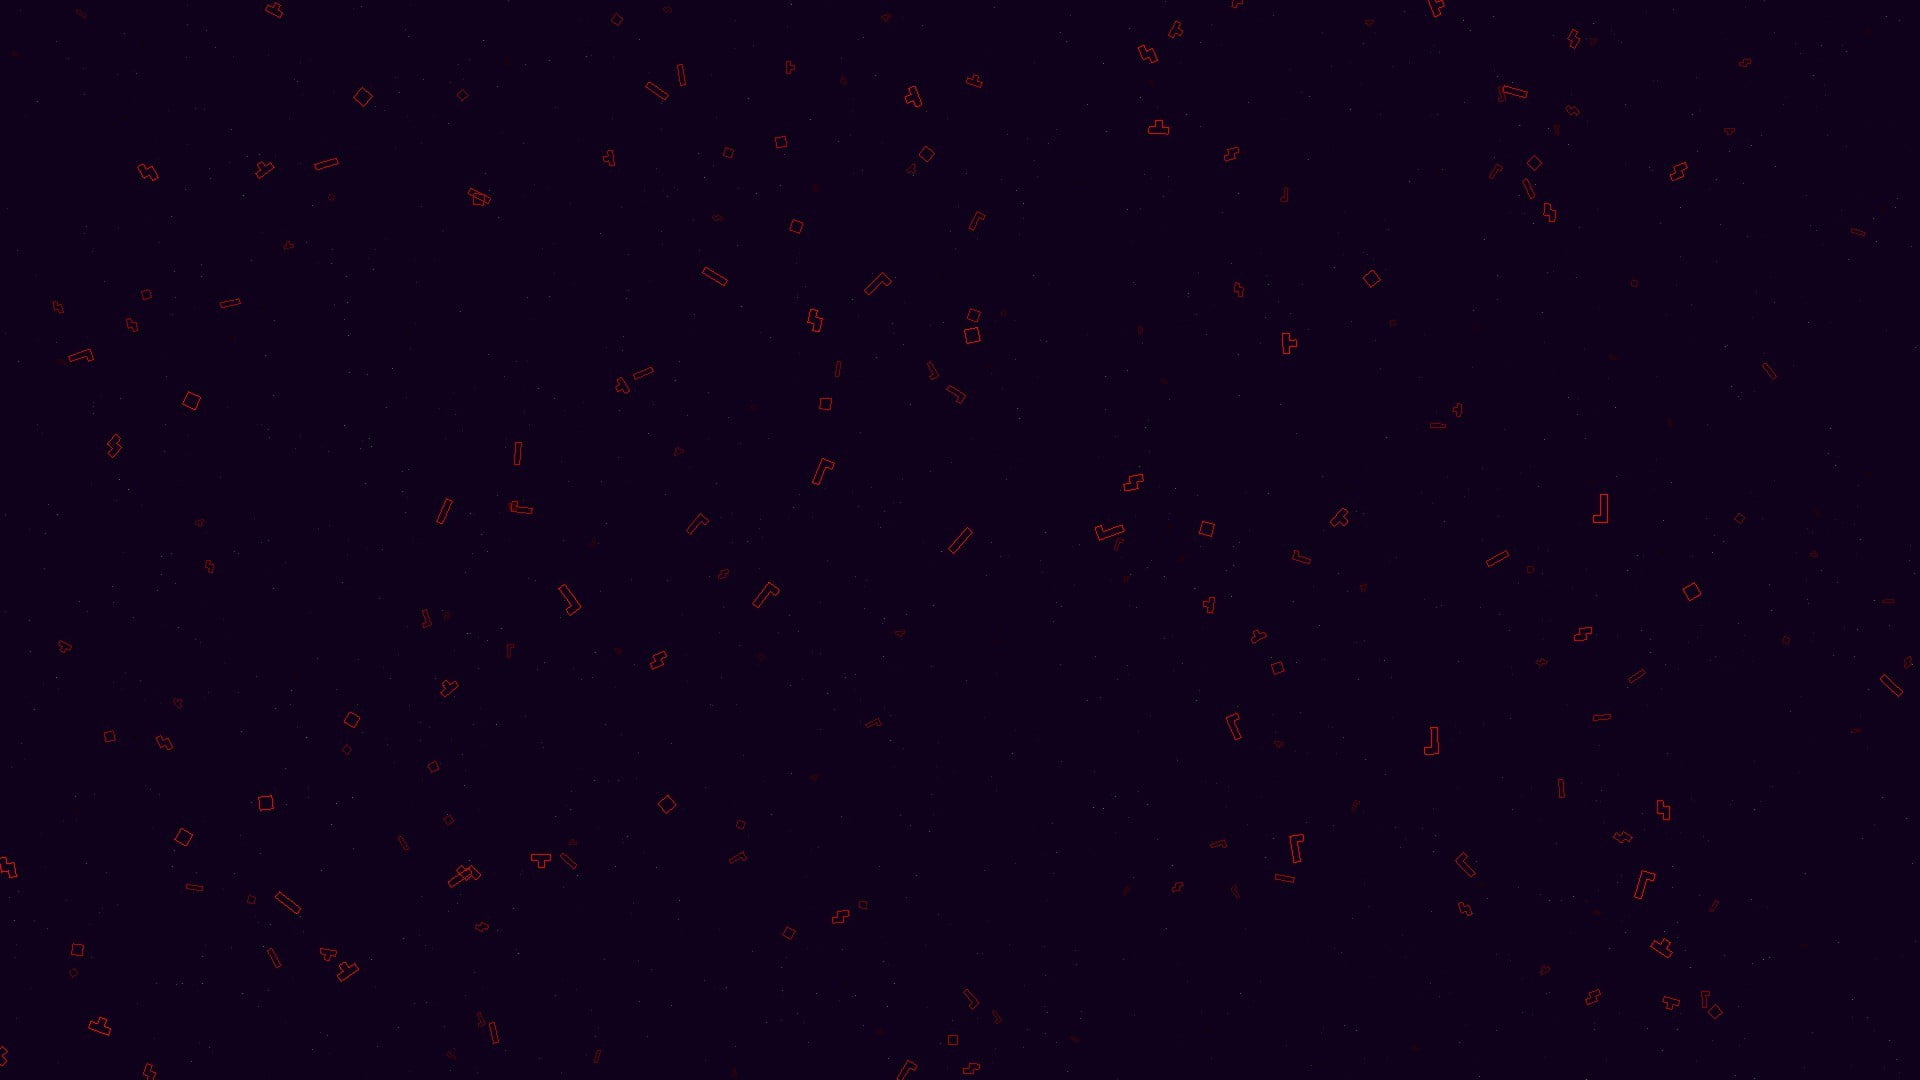 Fez , backgrounds, black color, abstract, no people, pattern